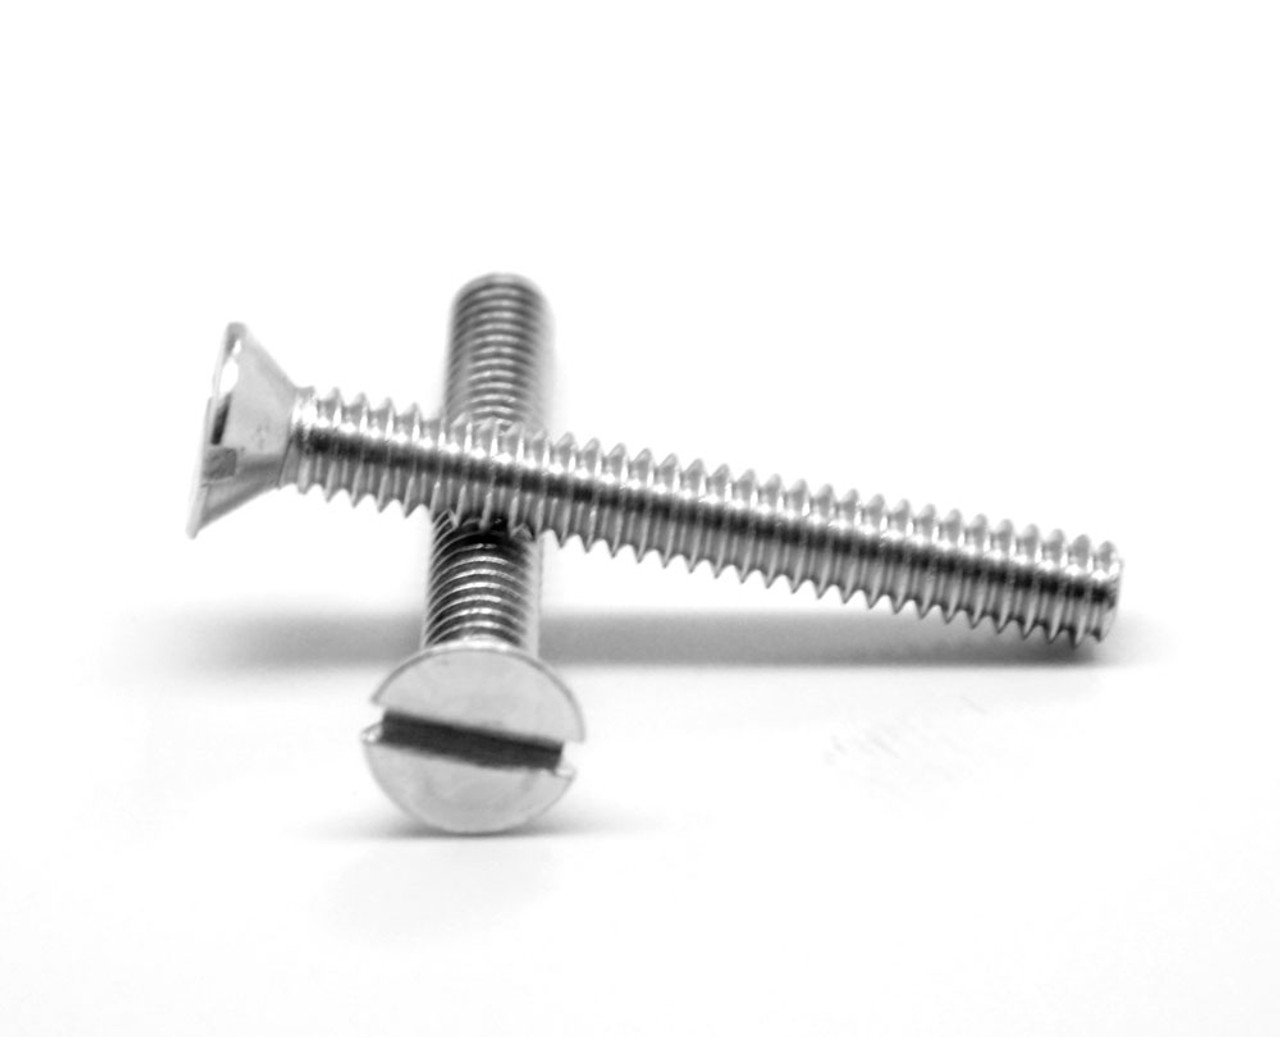 #10-32 x 5/8" (FT) Fine Thread Machine Screw Slotted Flat Head Stainless Steel 18-8